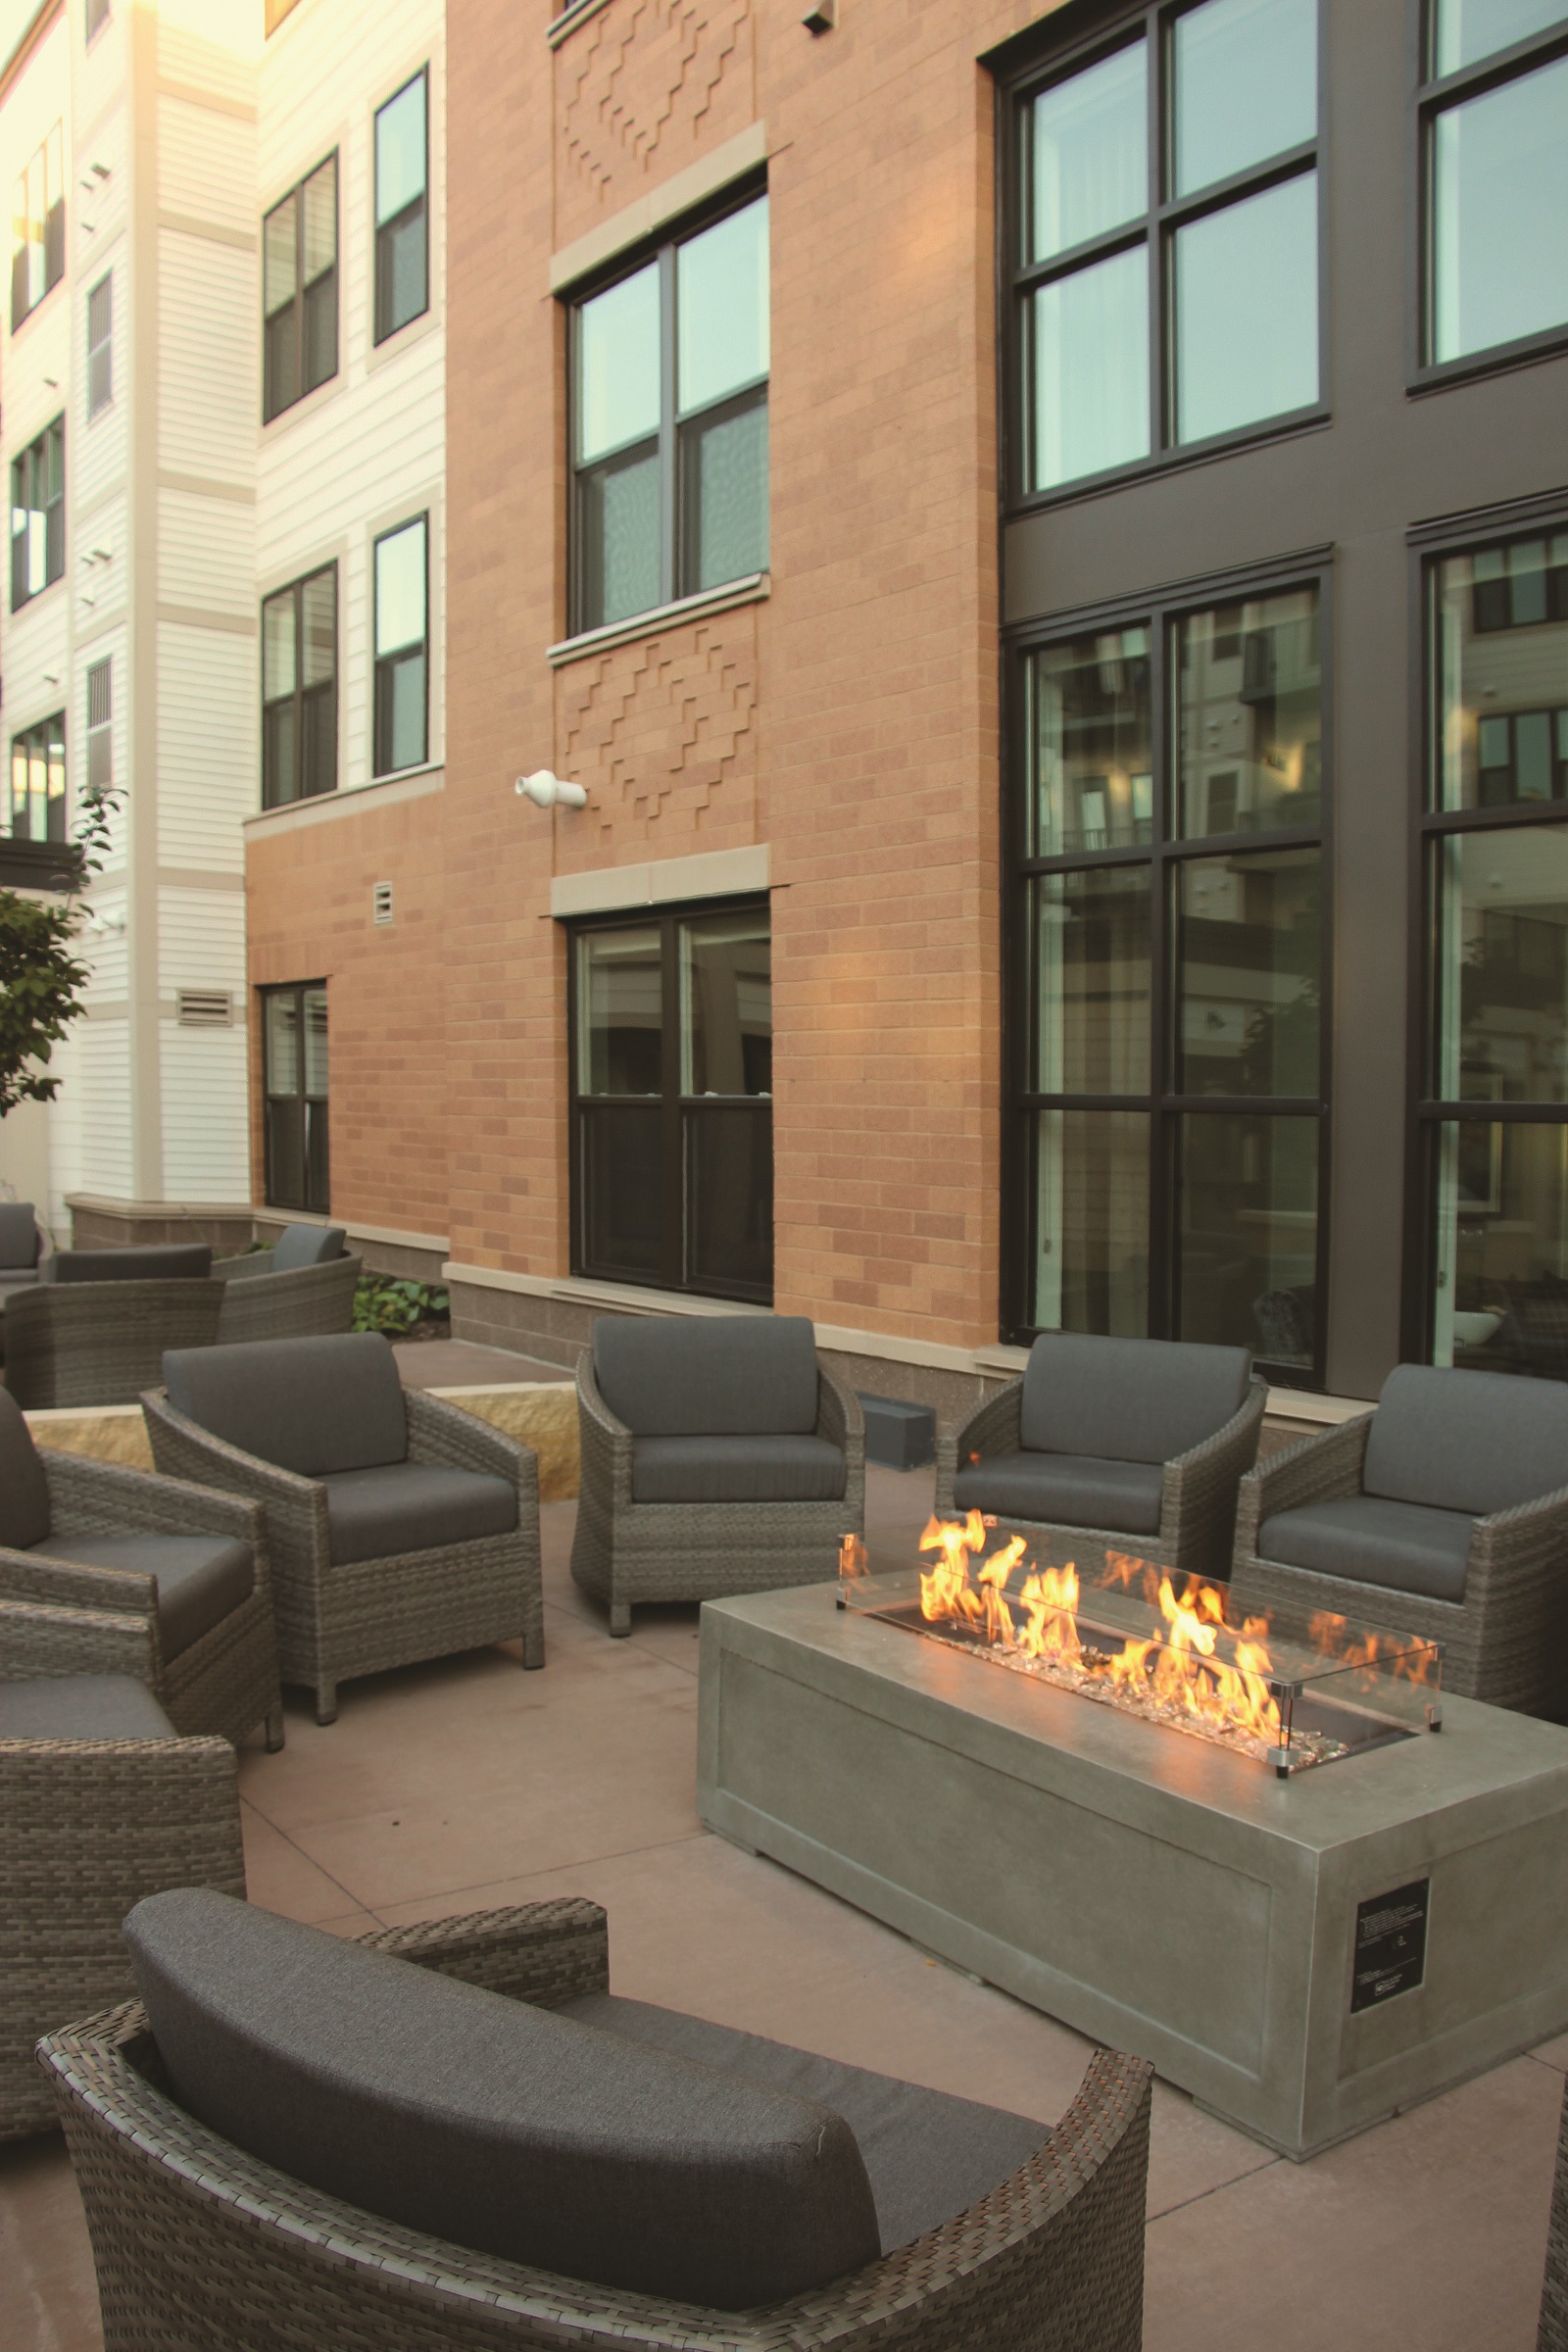 A modern apartment exterior with comfortable seating around a fire pitand no visible HVAC units to get in the way